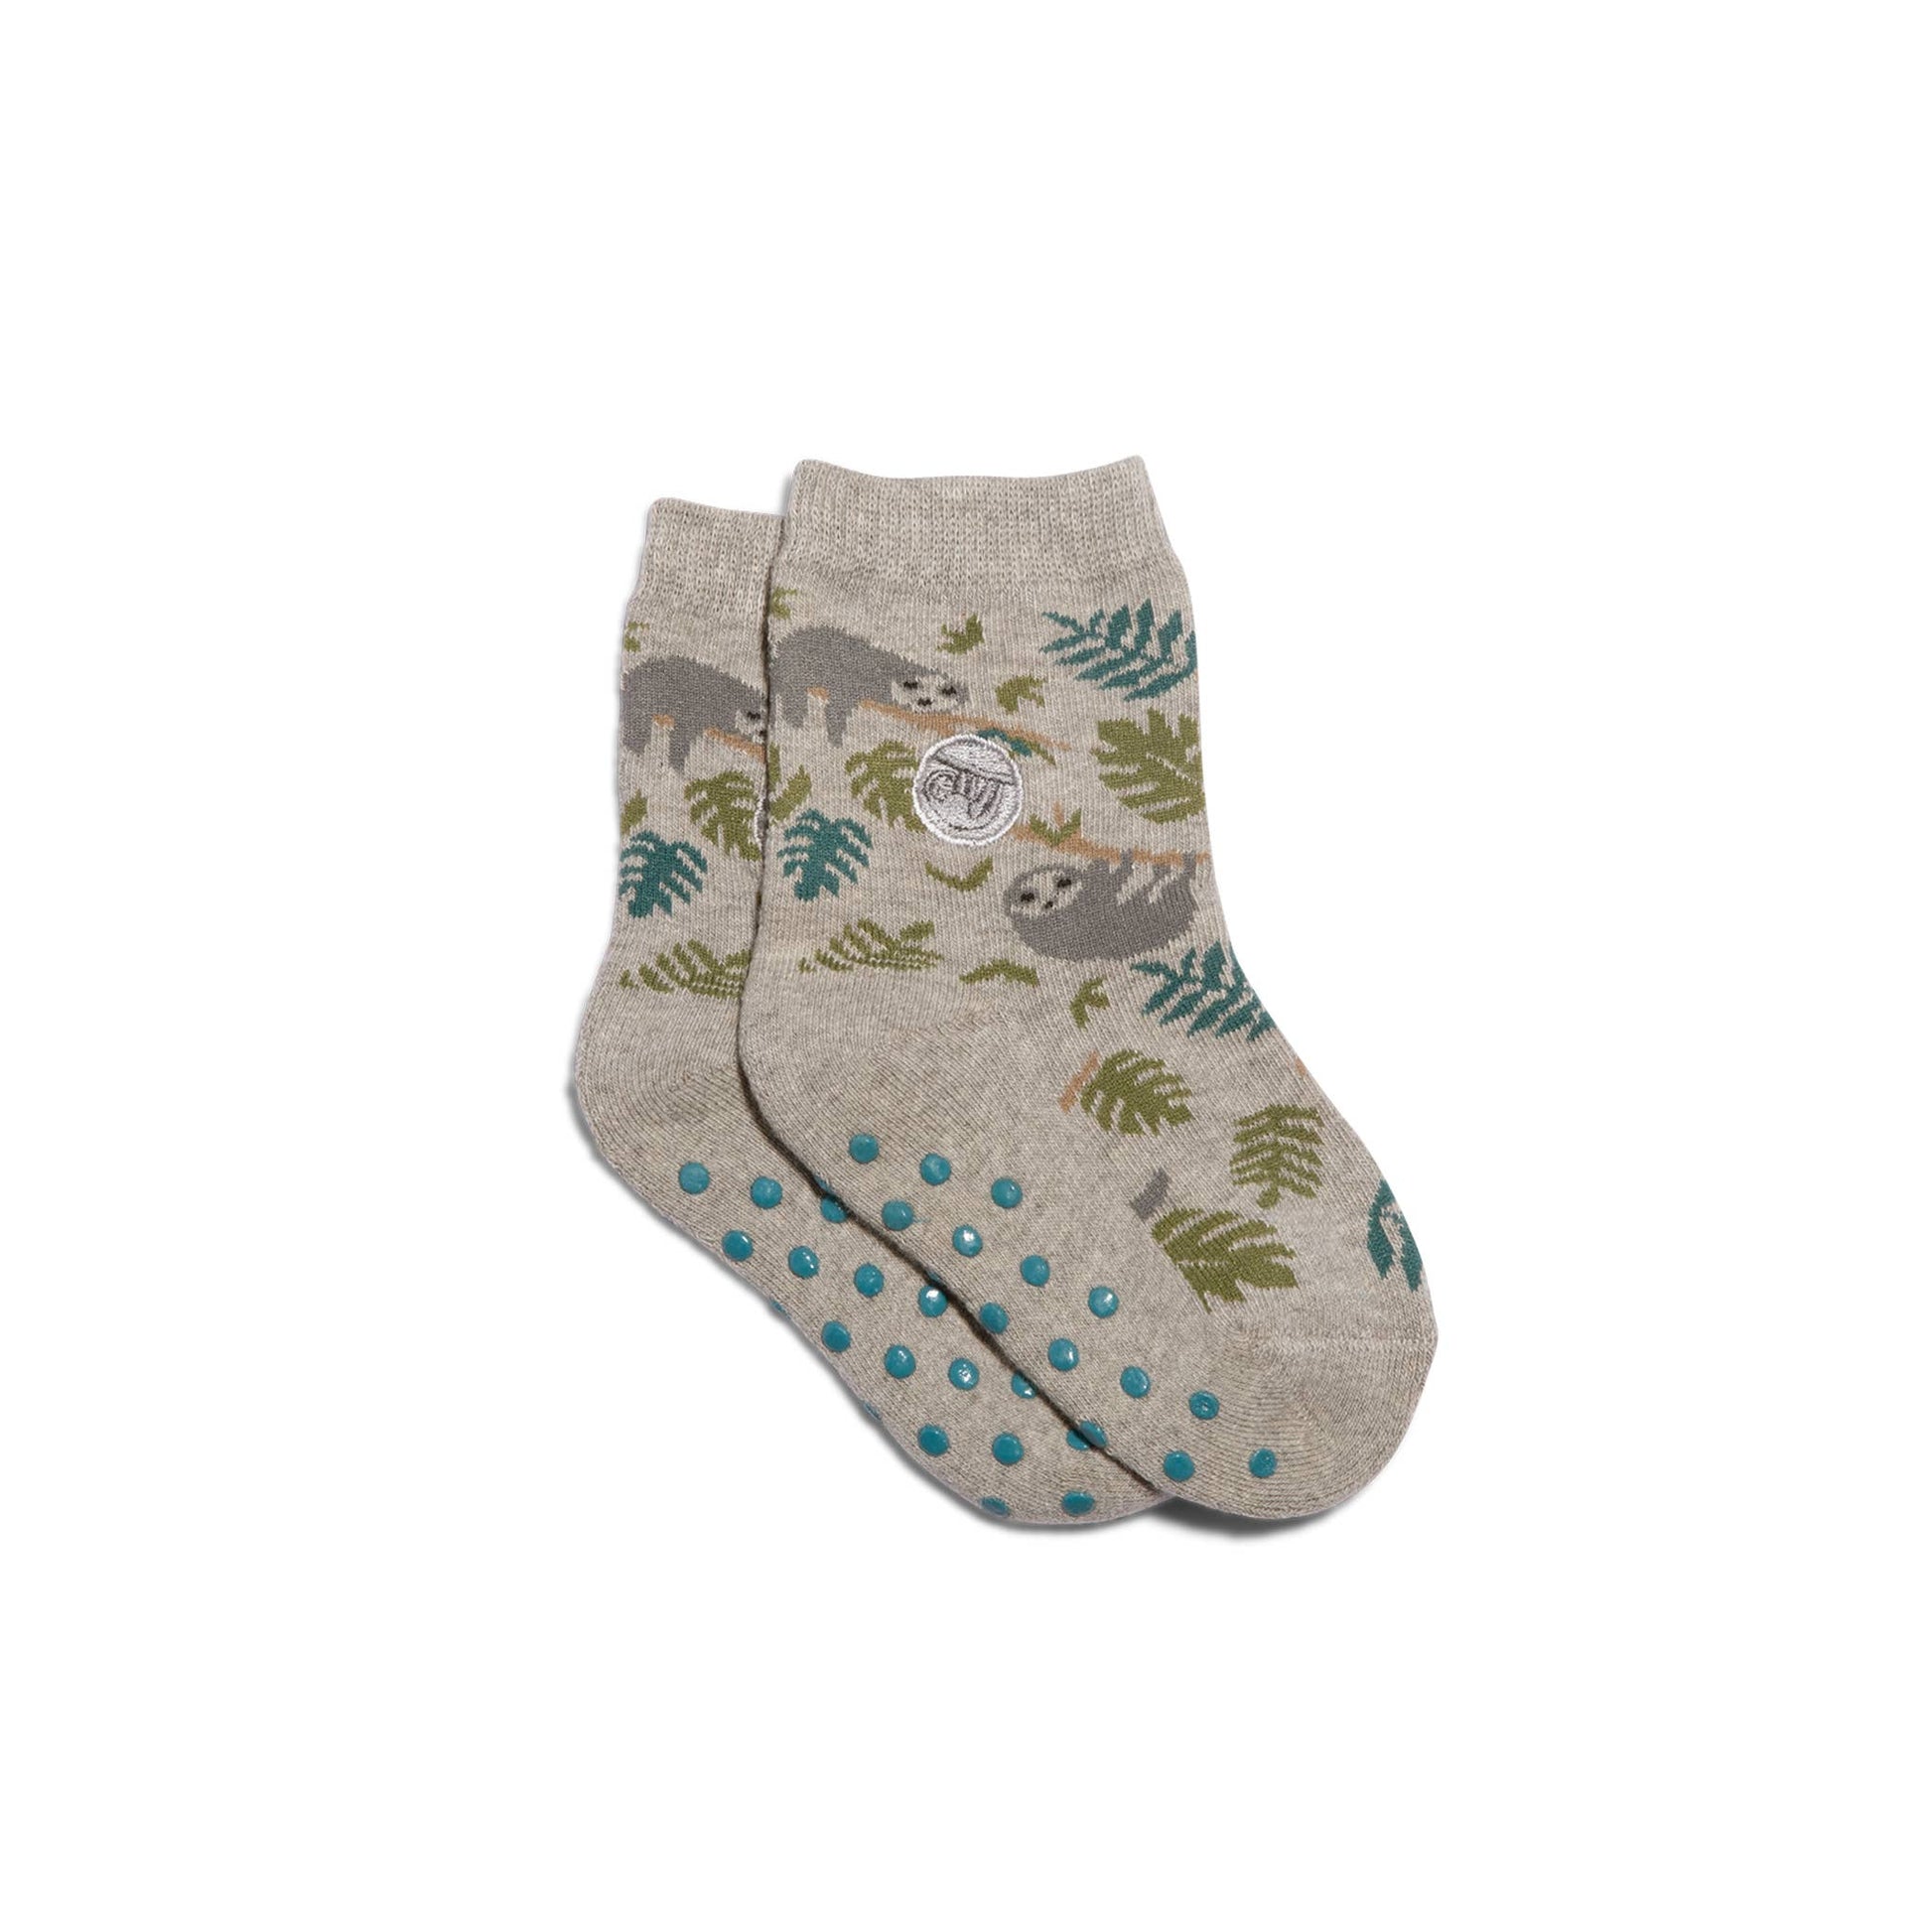 Conscious Step - Kids Socks that Protect Sloths  Conscious Step   -better made easy-eco-friendly-sustainable-gifting